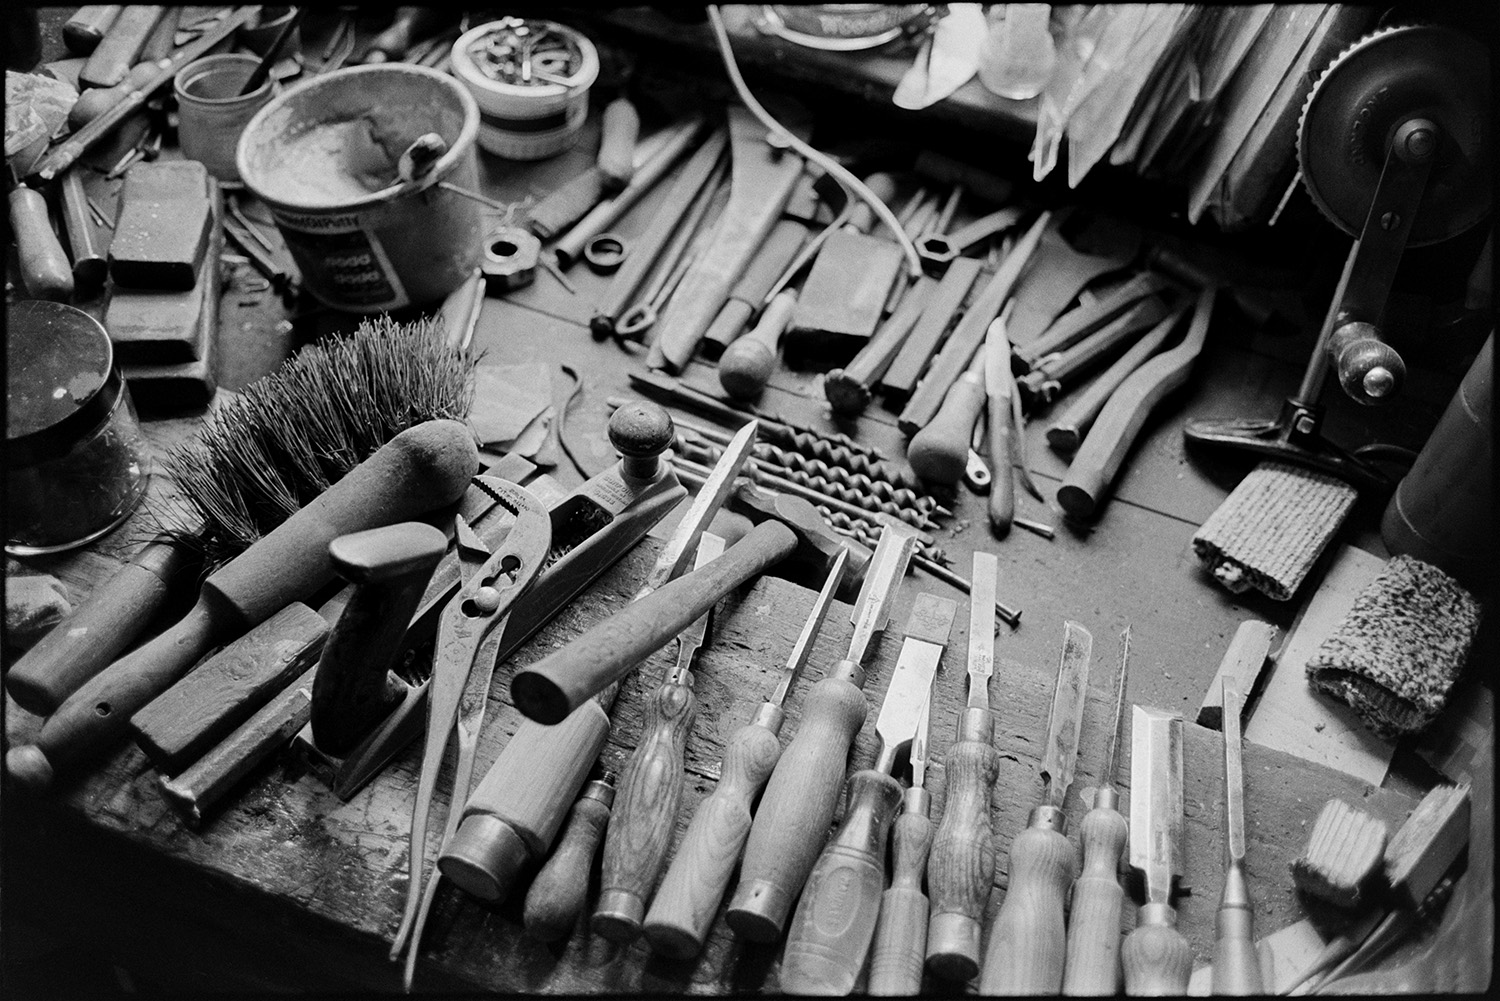 Tools, chisels etc on workshop bench. 
[Tools belonging to Bert Herd, including chisels, a brush, a hand drill and drill bits on a workshop bench at Arscotts, Dolton.]